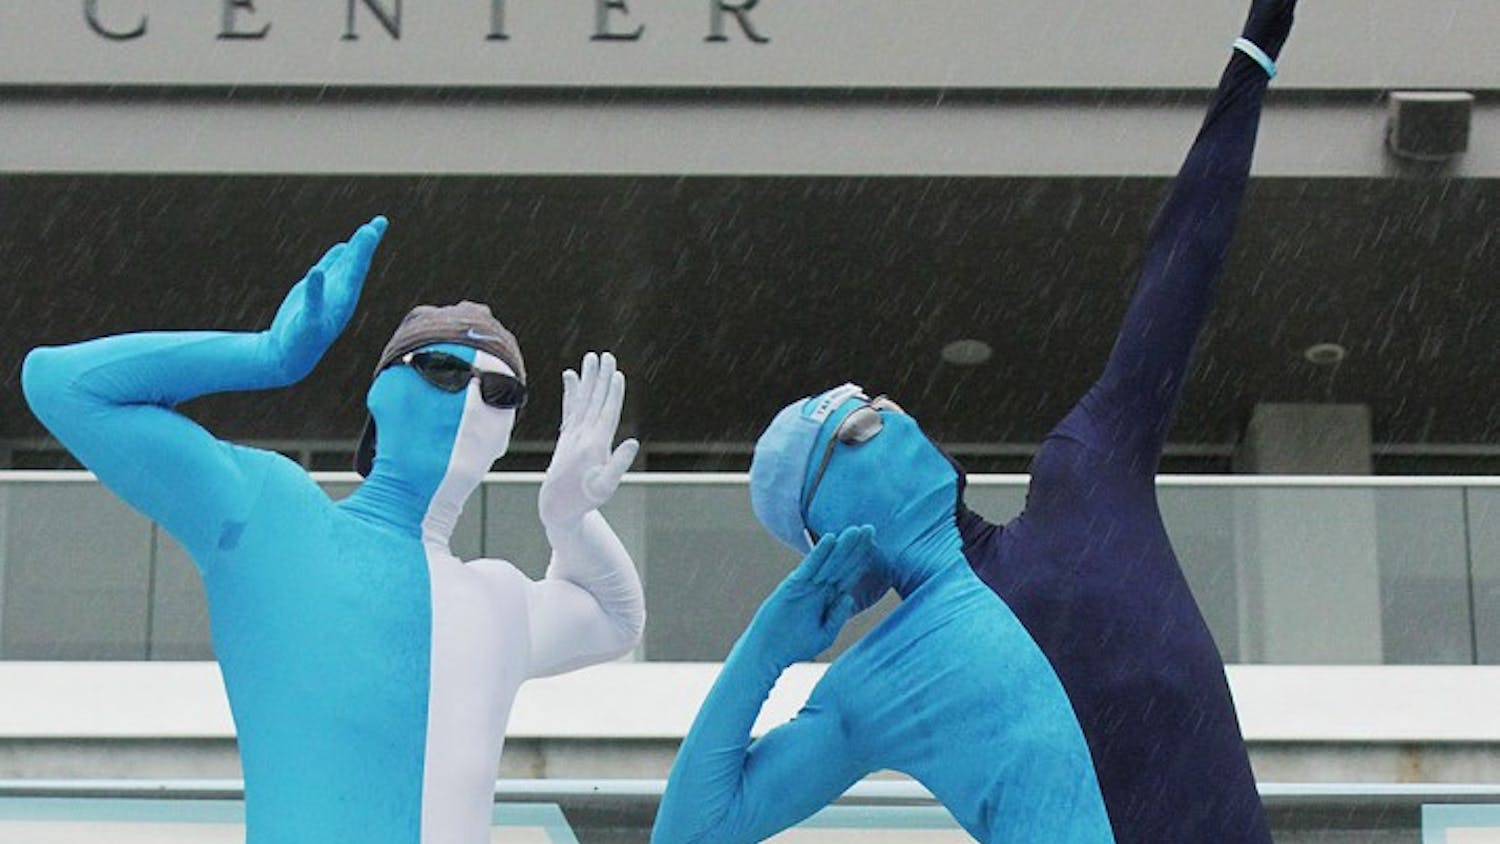 Photo: UNC's 'Blue Men' among the football team's loudest, most energetic fans (Robbie Harms)